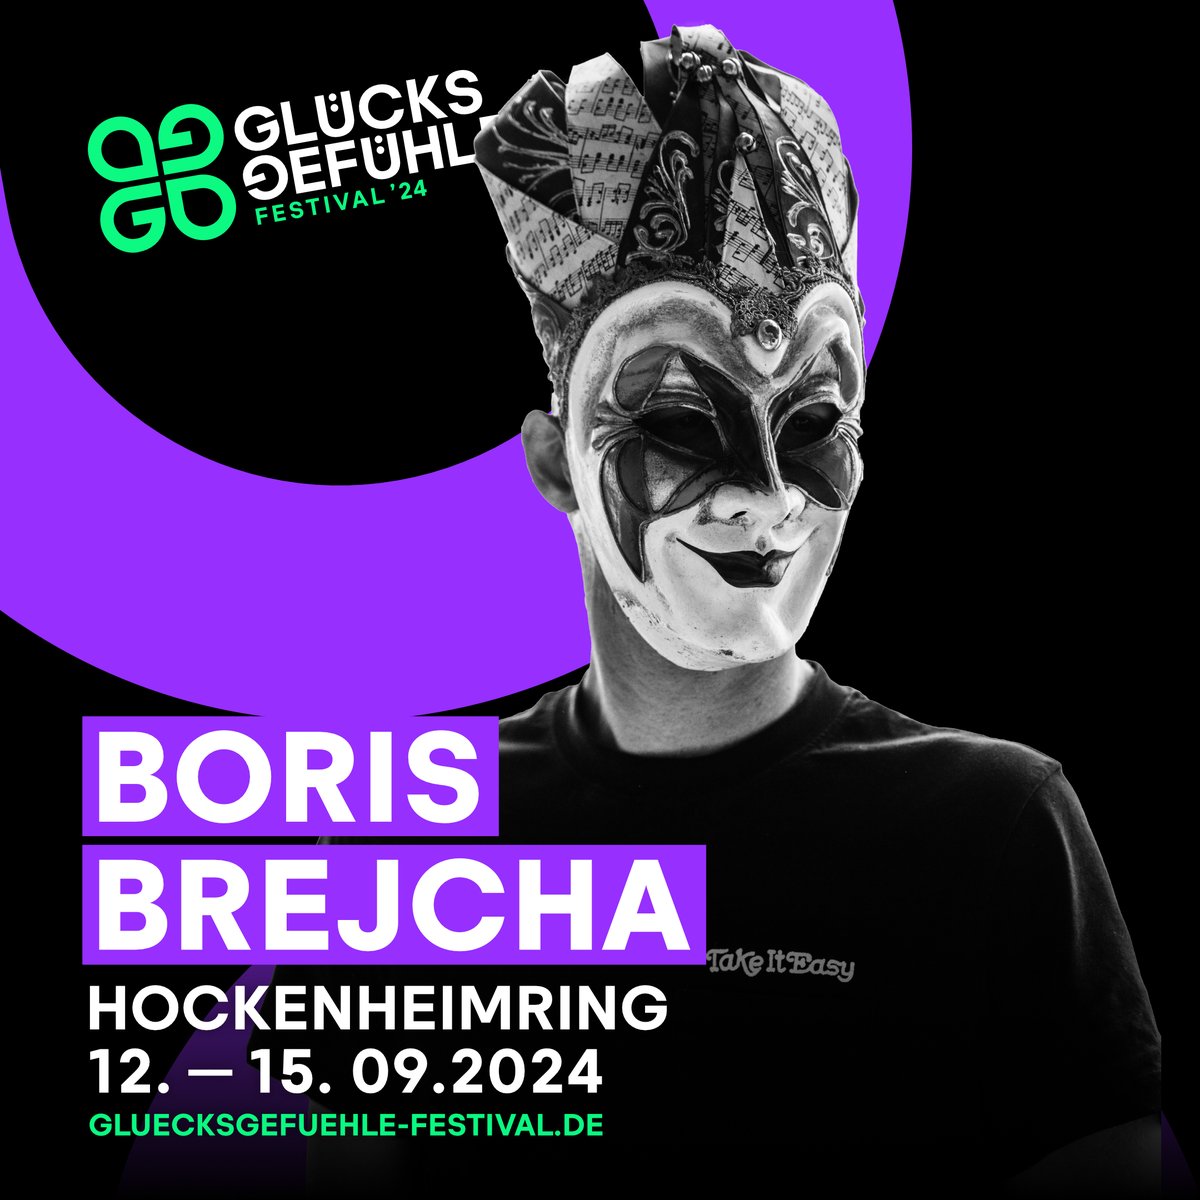 GLÜCKSGEFÜHLE Festival 2024 Happy for this one! 🥰 Tickets 🎫 tickets.gluecksgefuehle-festival.de/defec2fbd28e40… _ #festival #germany #gluecksgefuehle